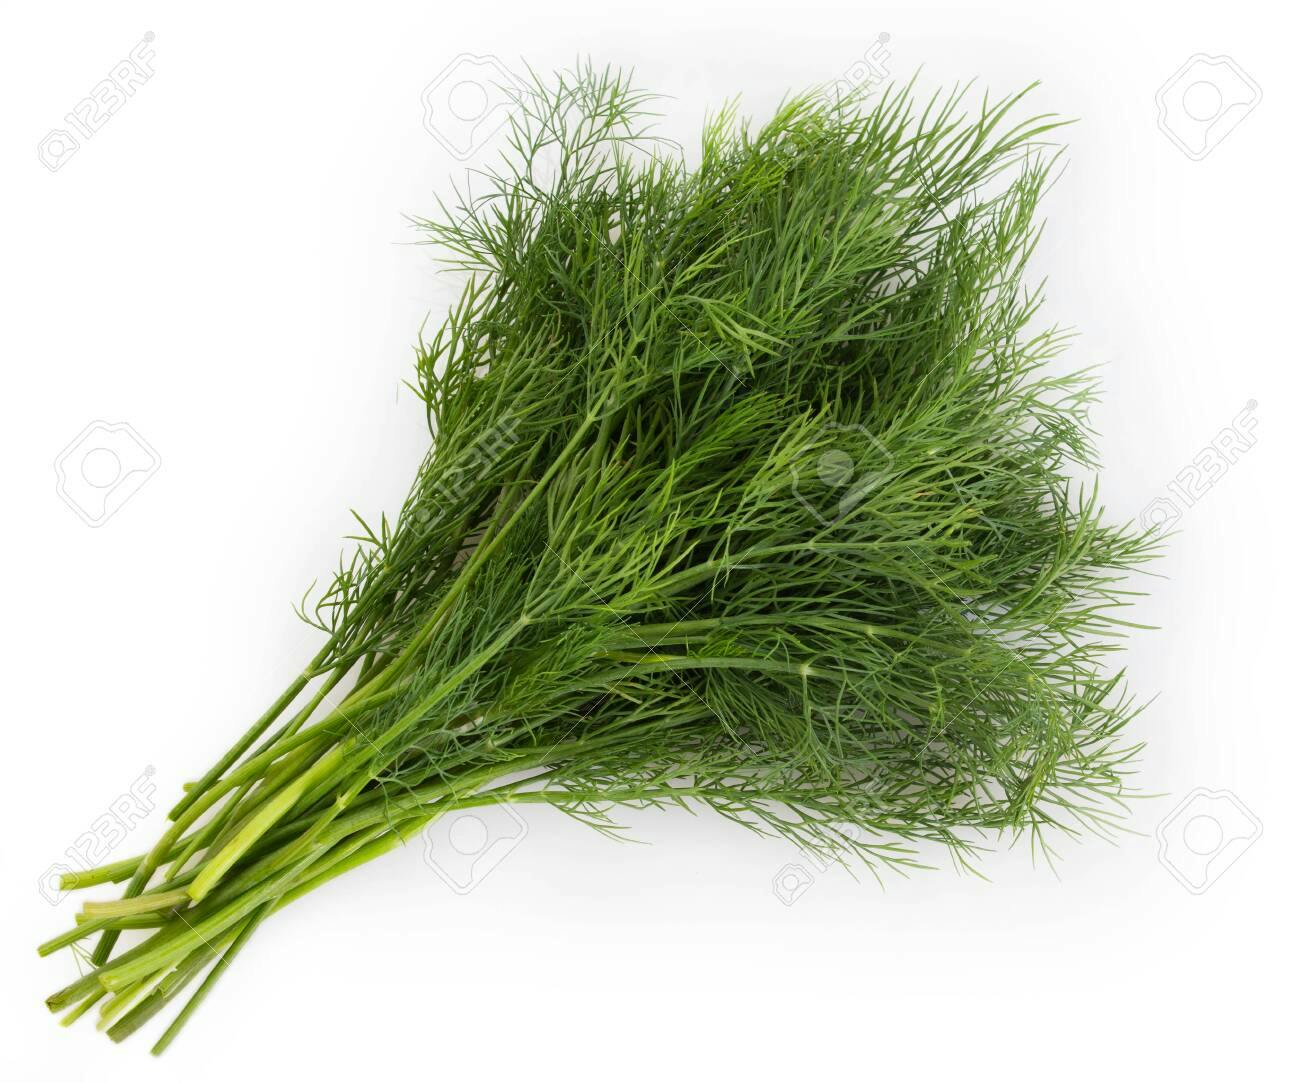 dill powder (from my channel)